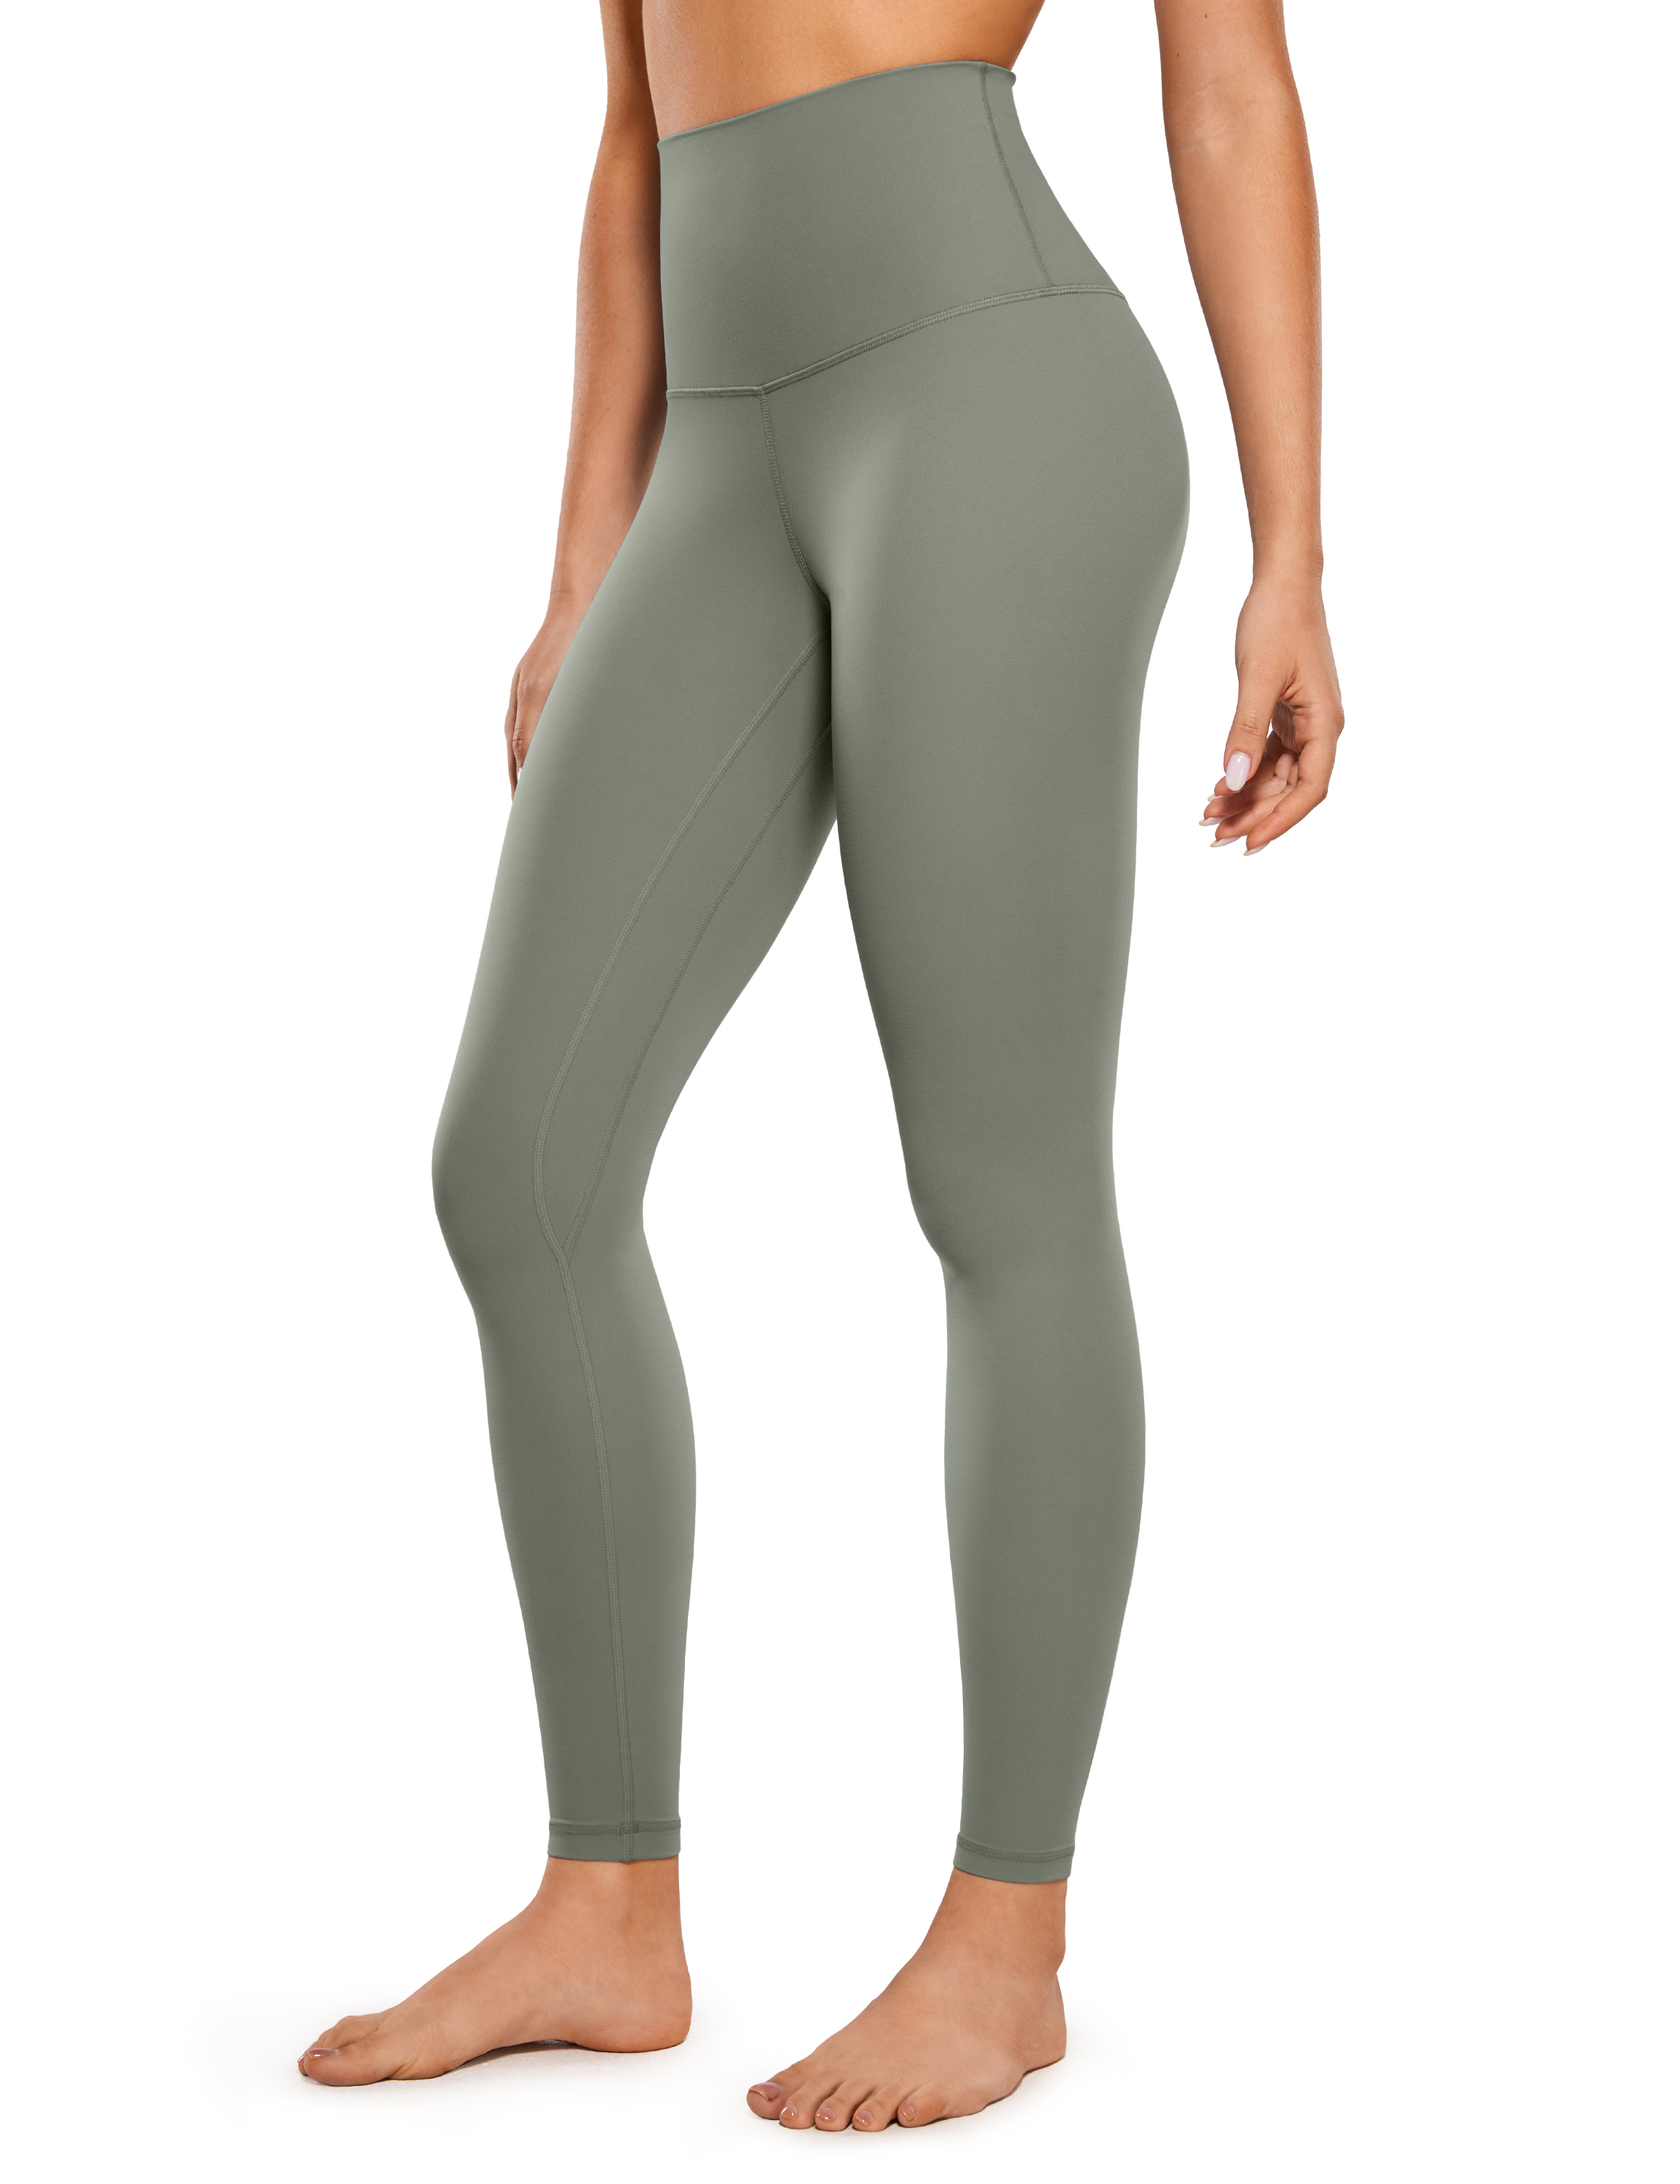 CRZ YOGA Butterluxe Super High Waisted Workout Leggings 28 Inches